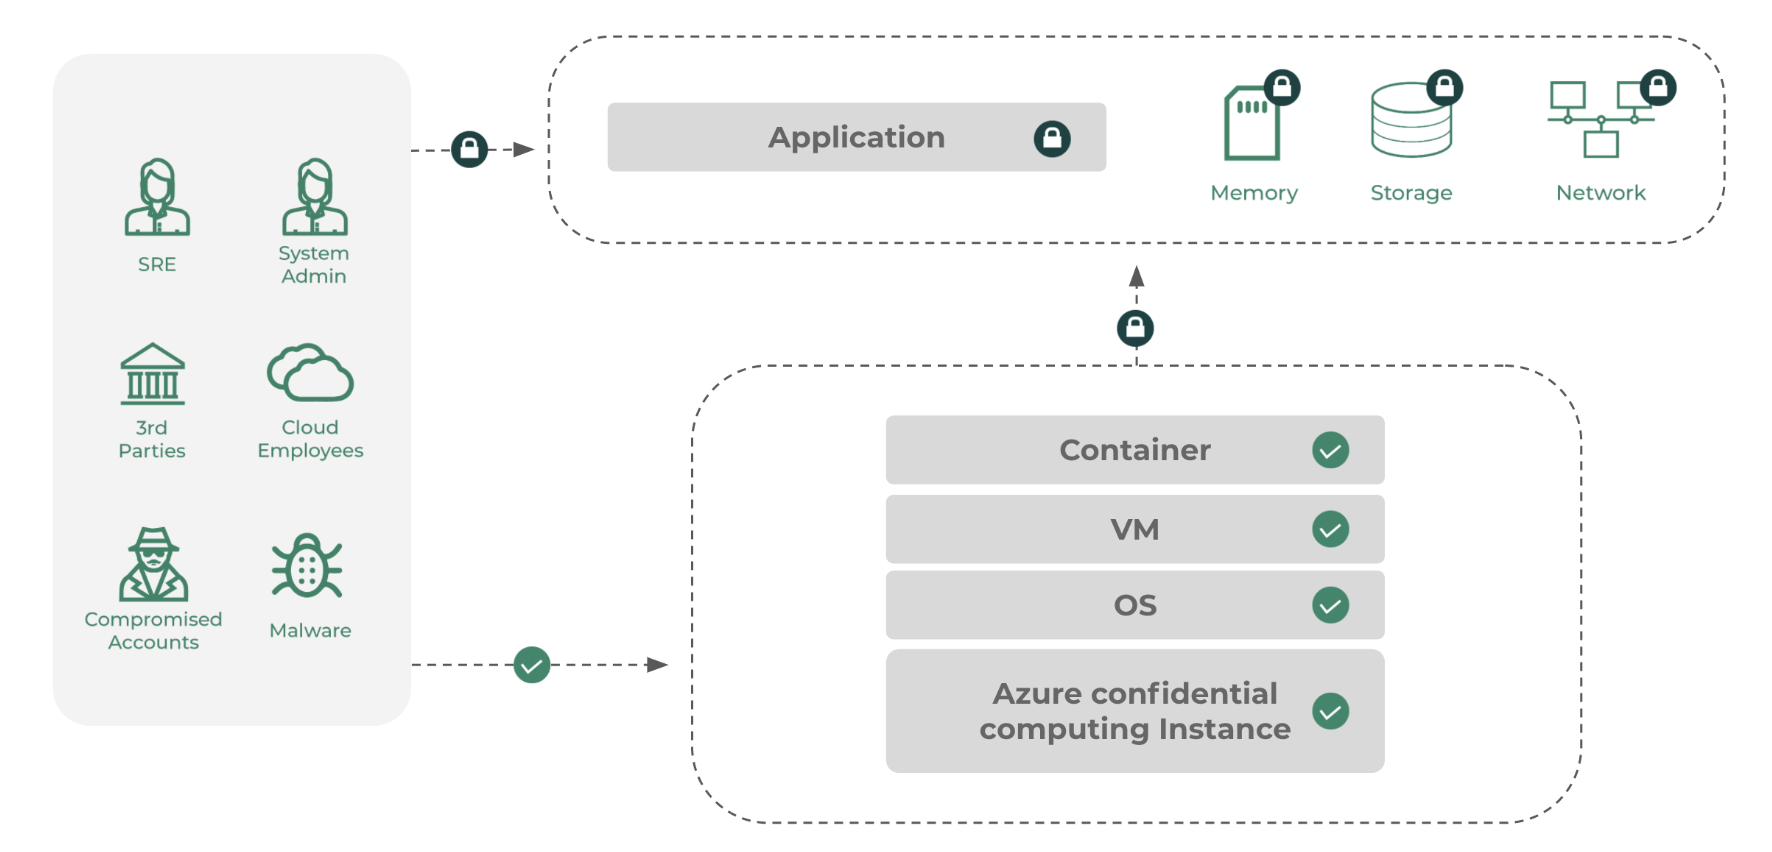 Diagram of Anjuna's process, showing how containers are run on Azure confidential computing.